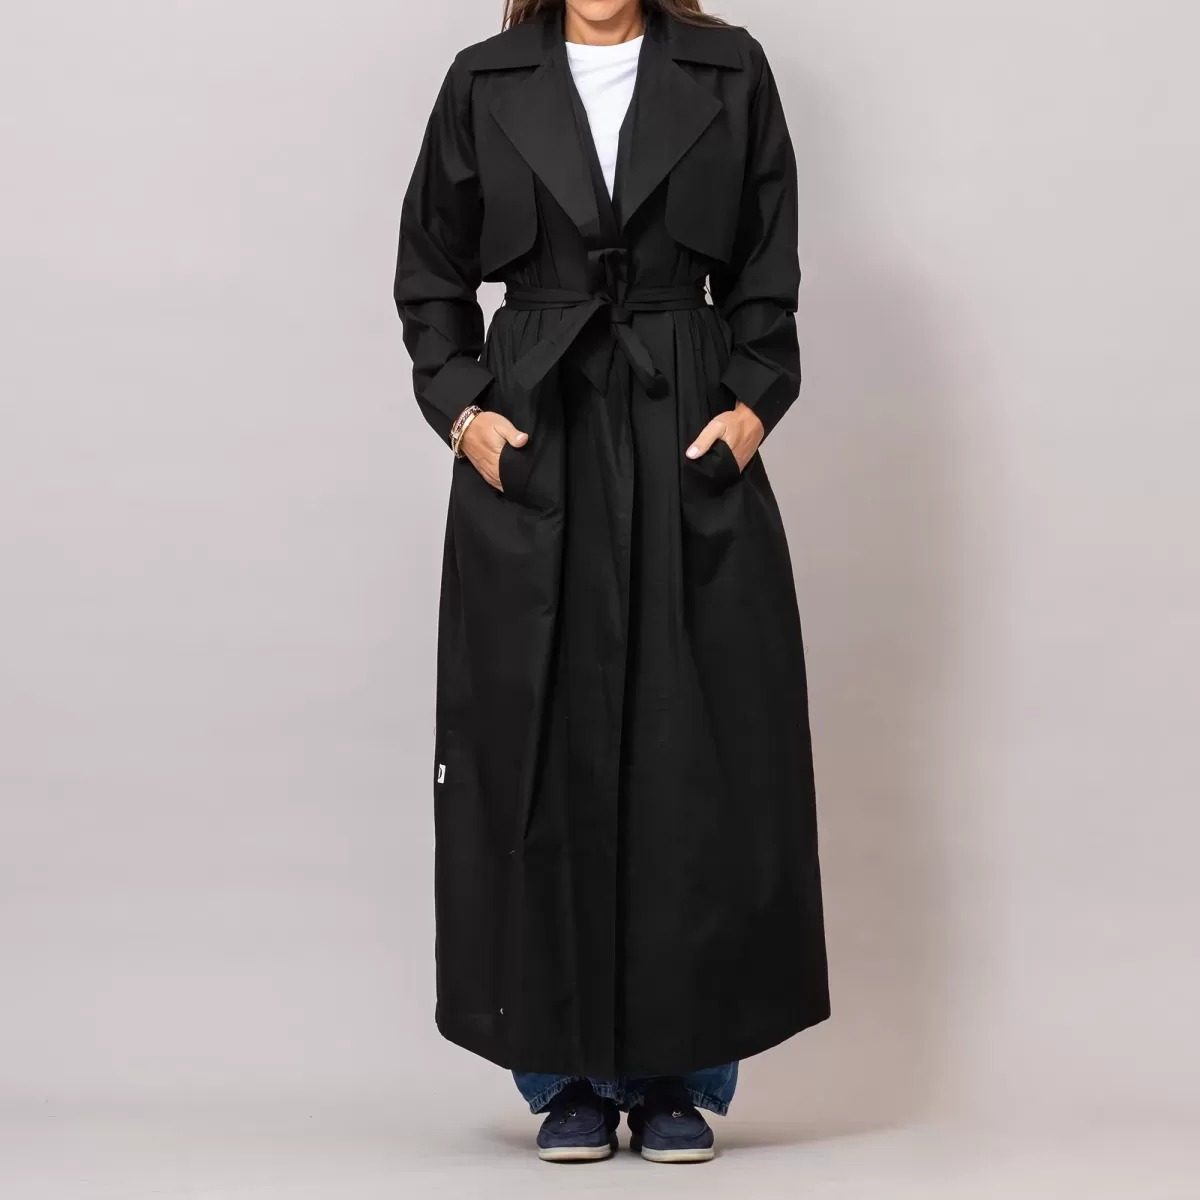 Duster Textured Cotton Black Coat with Gilet